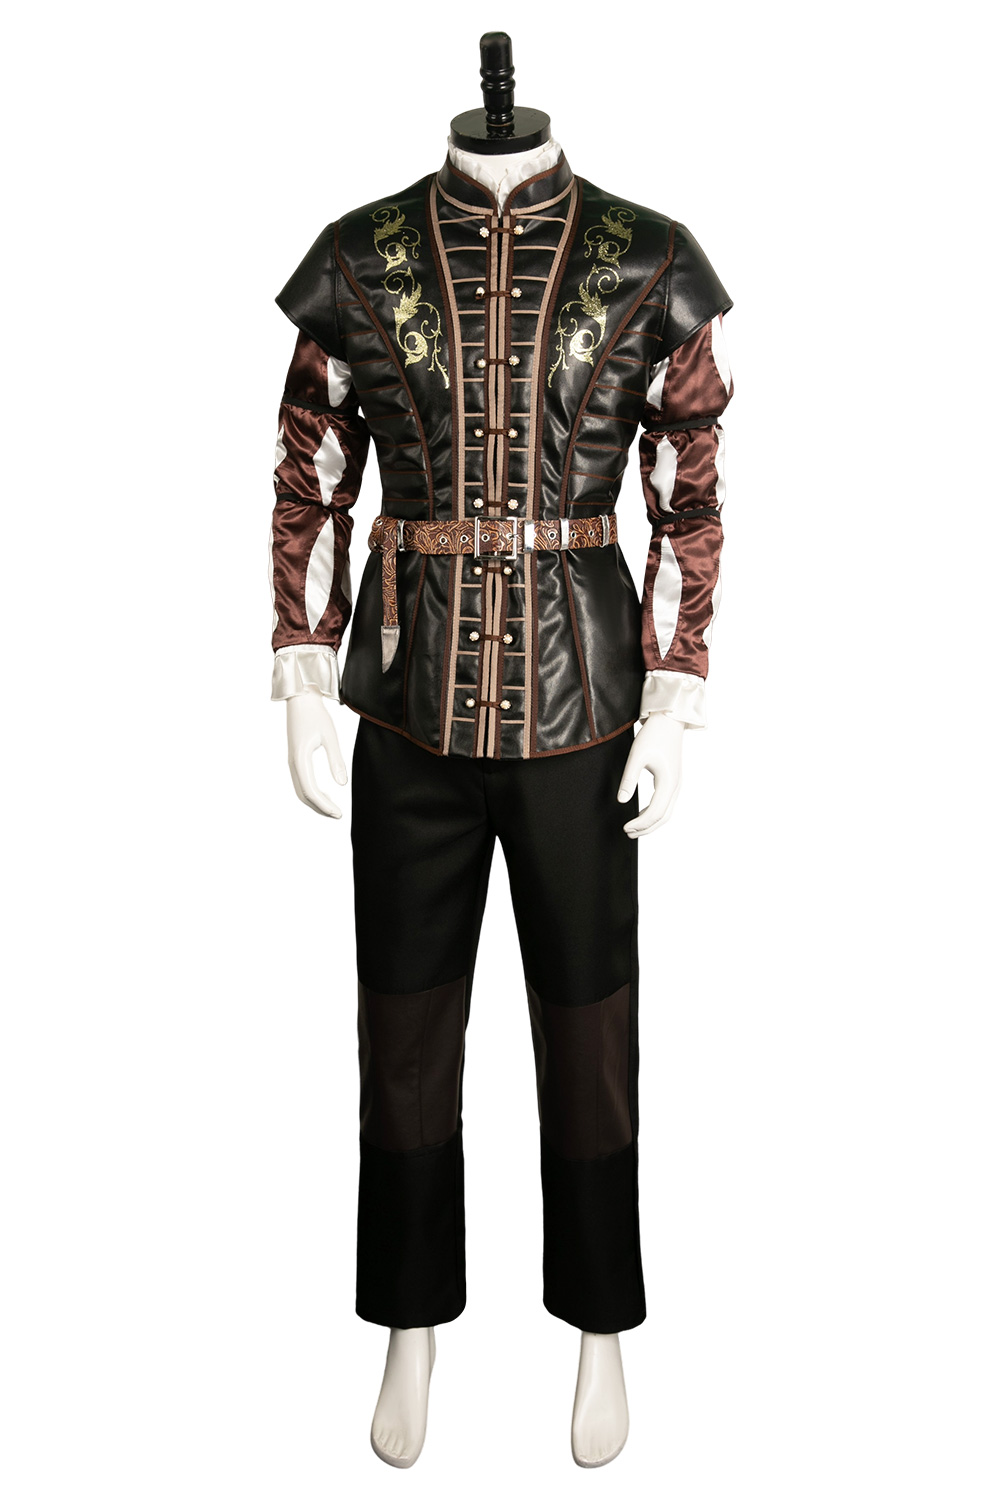 Game Baldur's Gate Astarion Outfits Halloween Carnival Suit Cosplay Costume